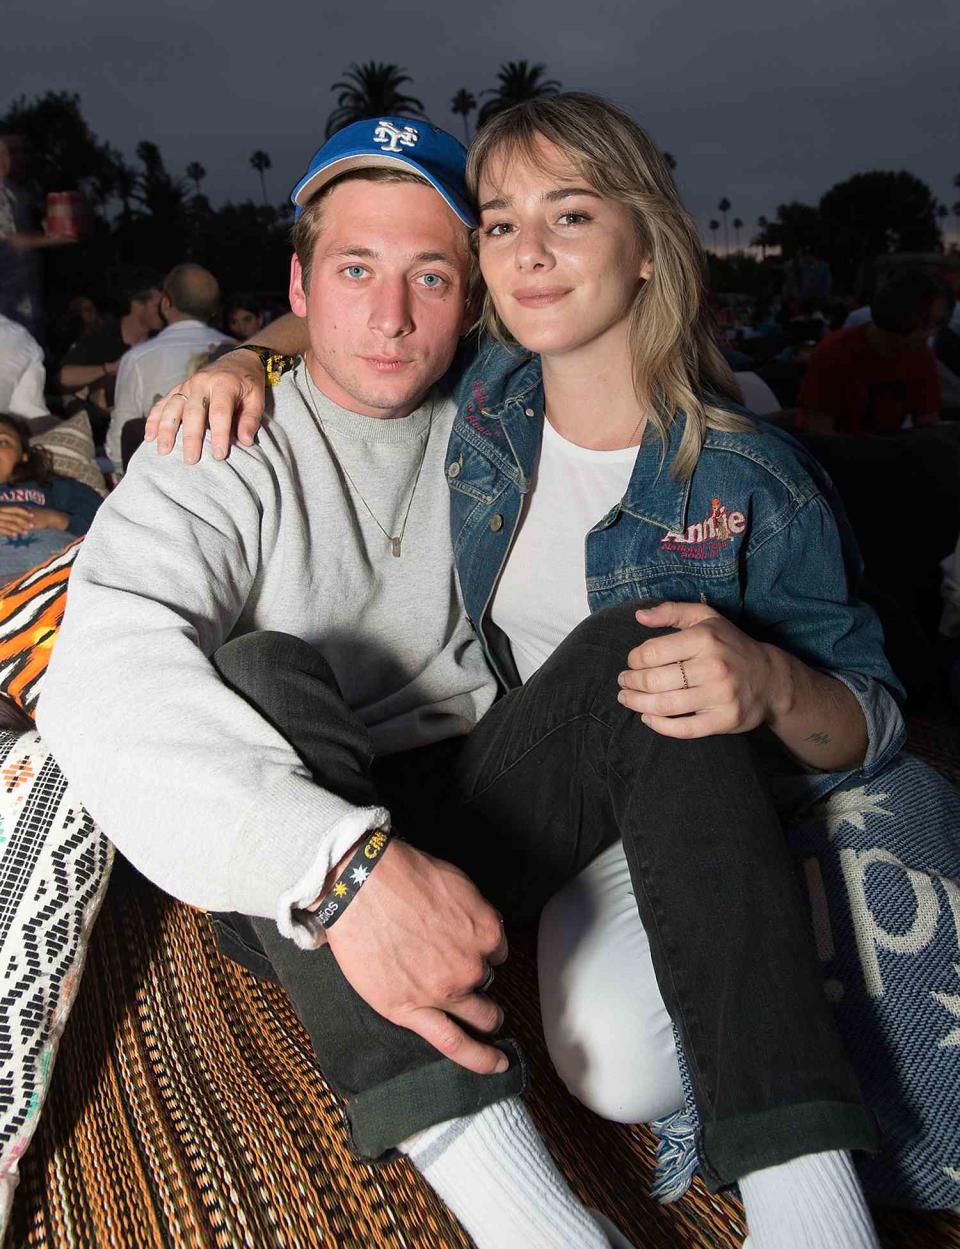 Jeremy Allen White and Addison Timlin attend Cinespia's screening of 'Dirty Dancing' held at Hollywood Forever on July 1, 2017 in Hollywood, California